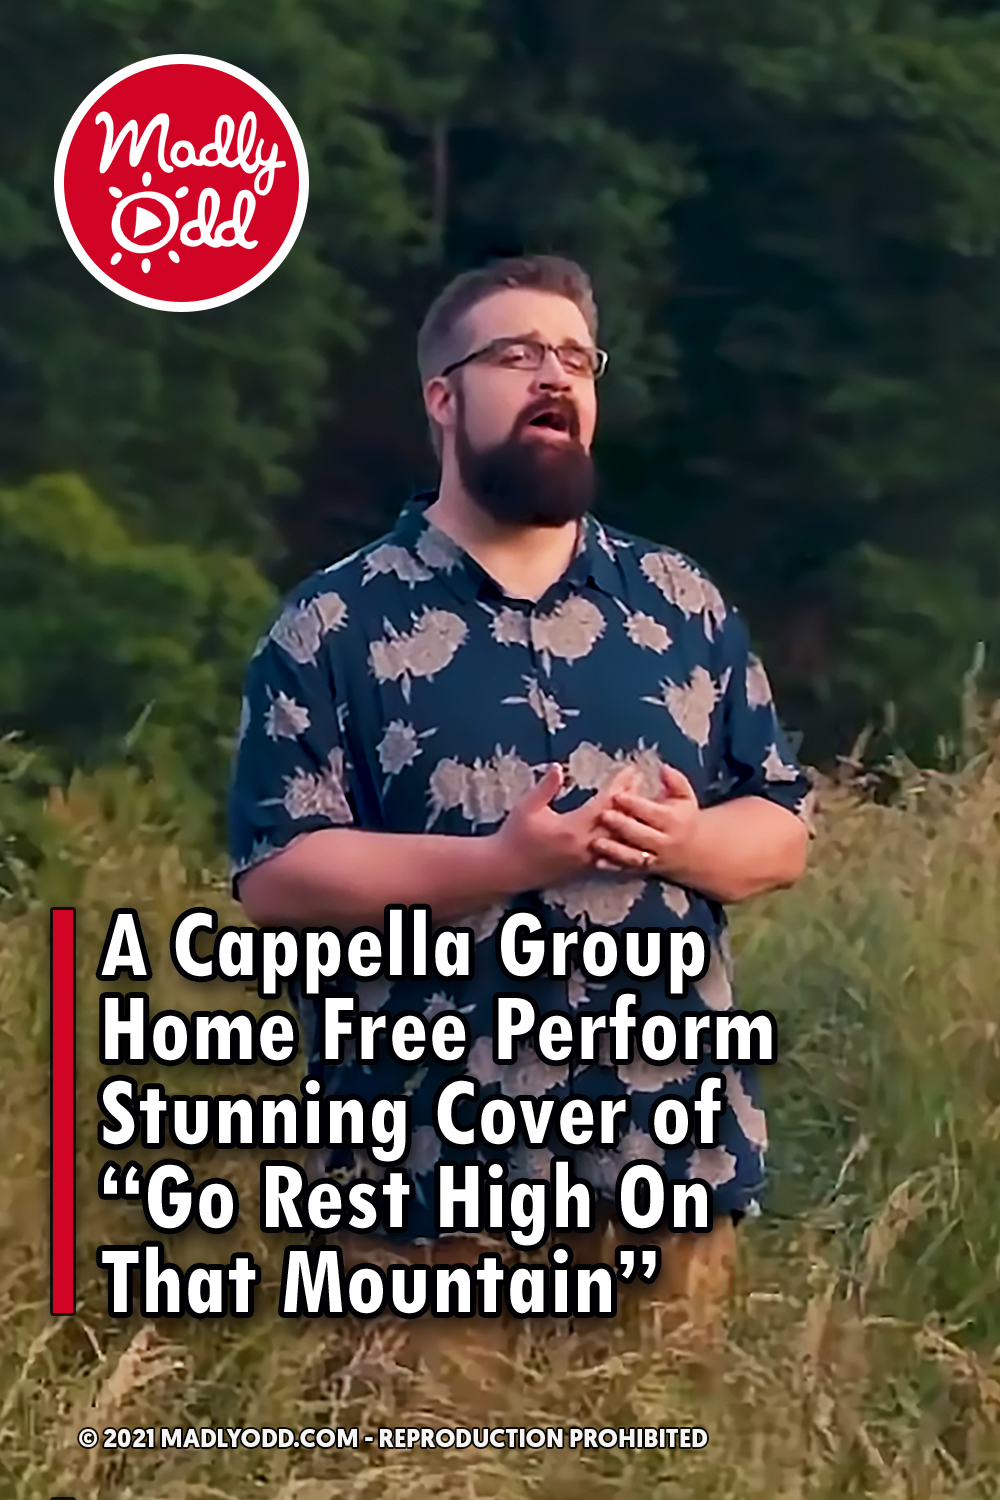 A Cappella Group Home Free Perform Stunning Cover of “Go Rest High On That Mountain”